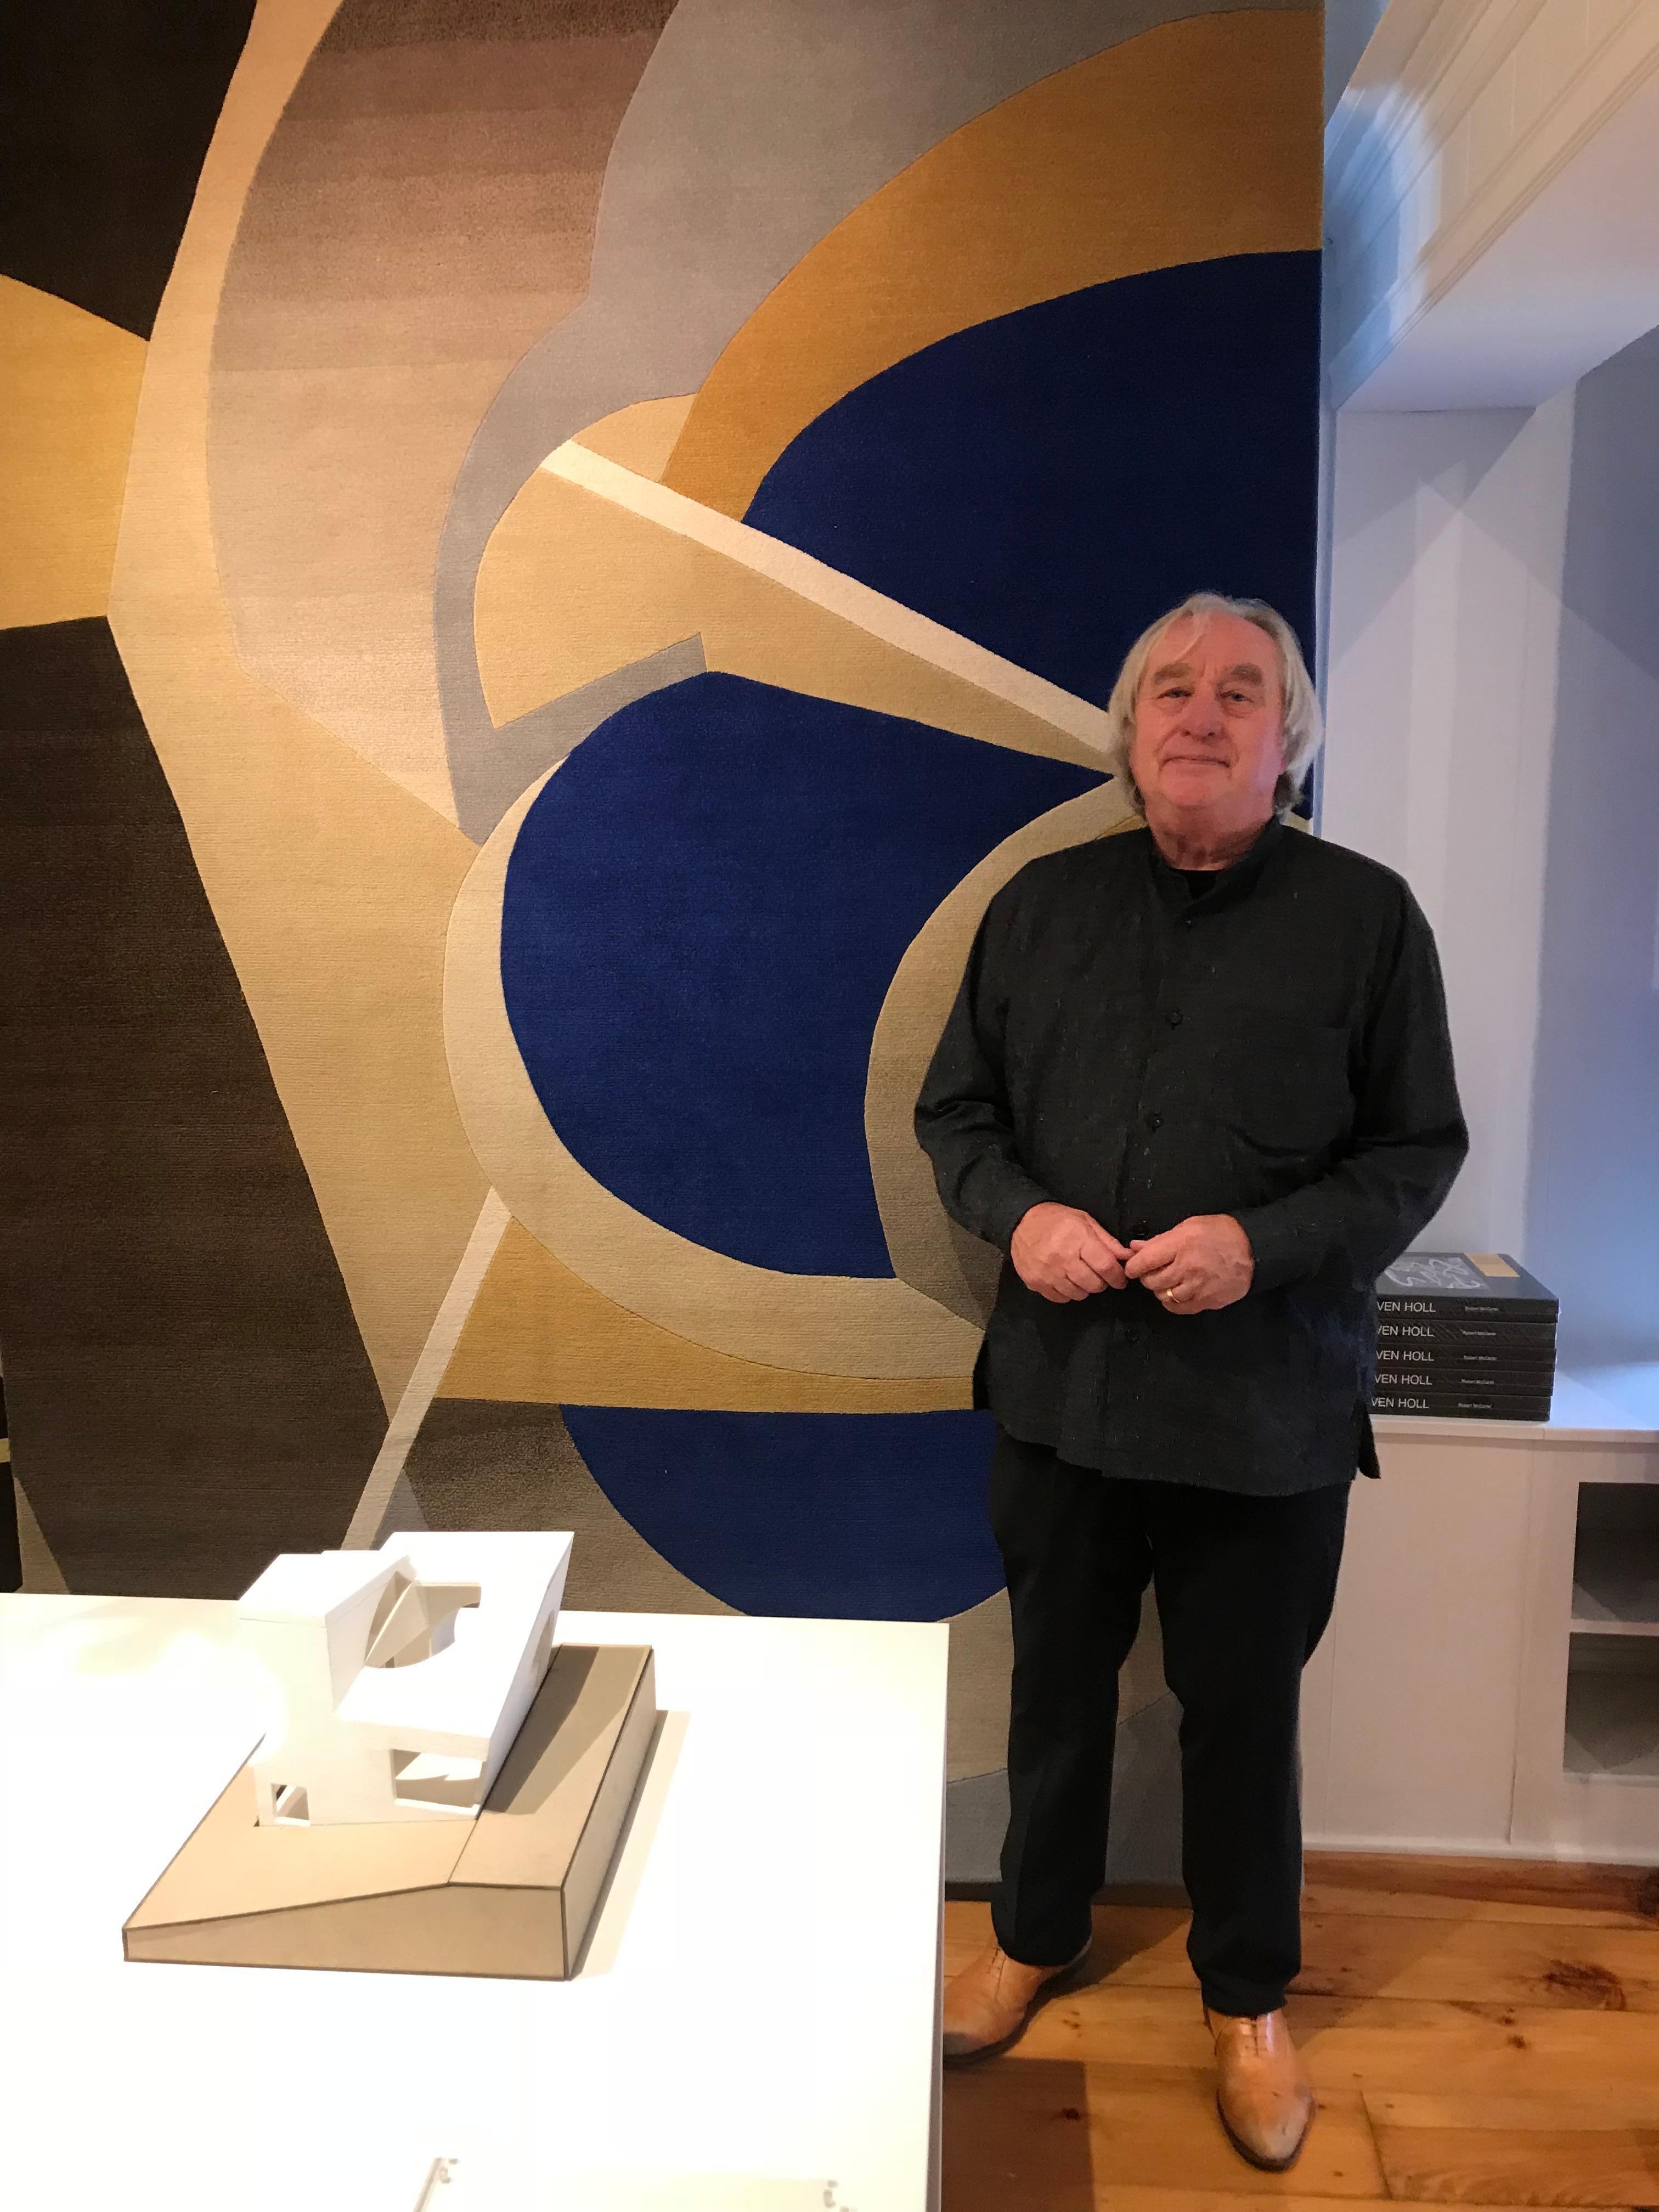 Ex of IN Carpet designed by Architect Steven Holl for cc-tapis in Himalayan wool.

Ex of IN Carpet
standard color version
designed by Steven holl

cc-tapis is proud to collaborate with architect Steven Holl and present his new capsule collection of